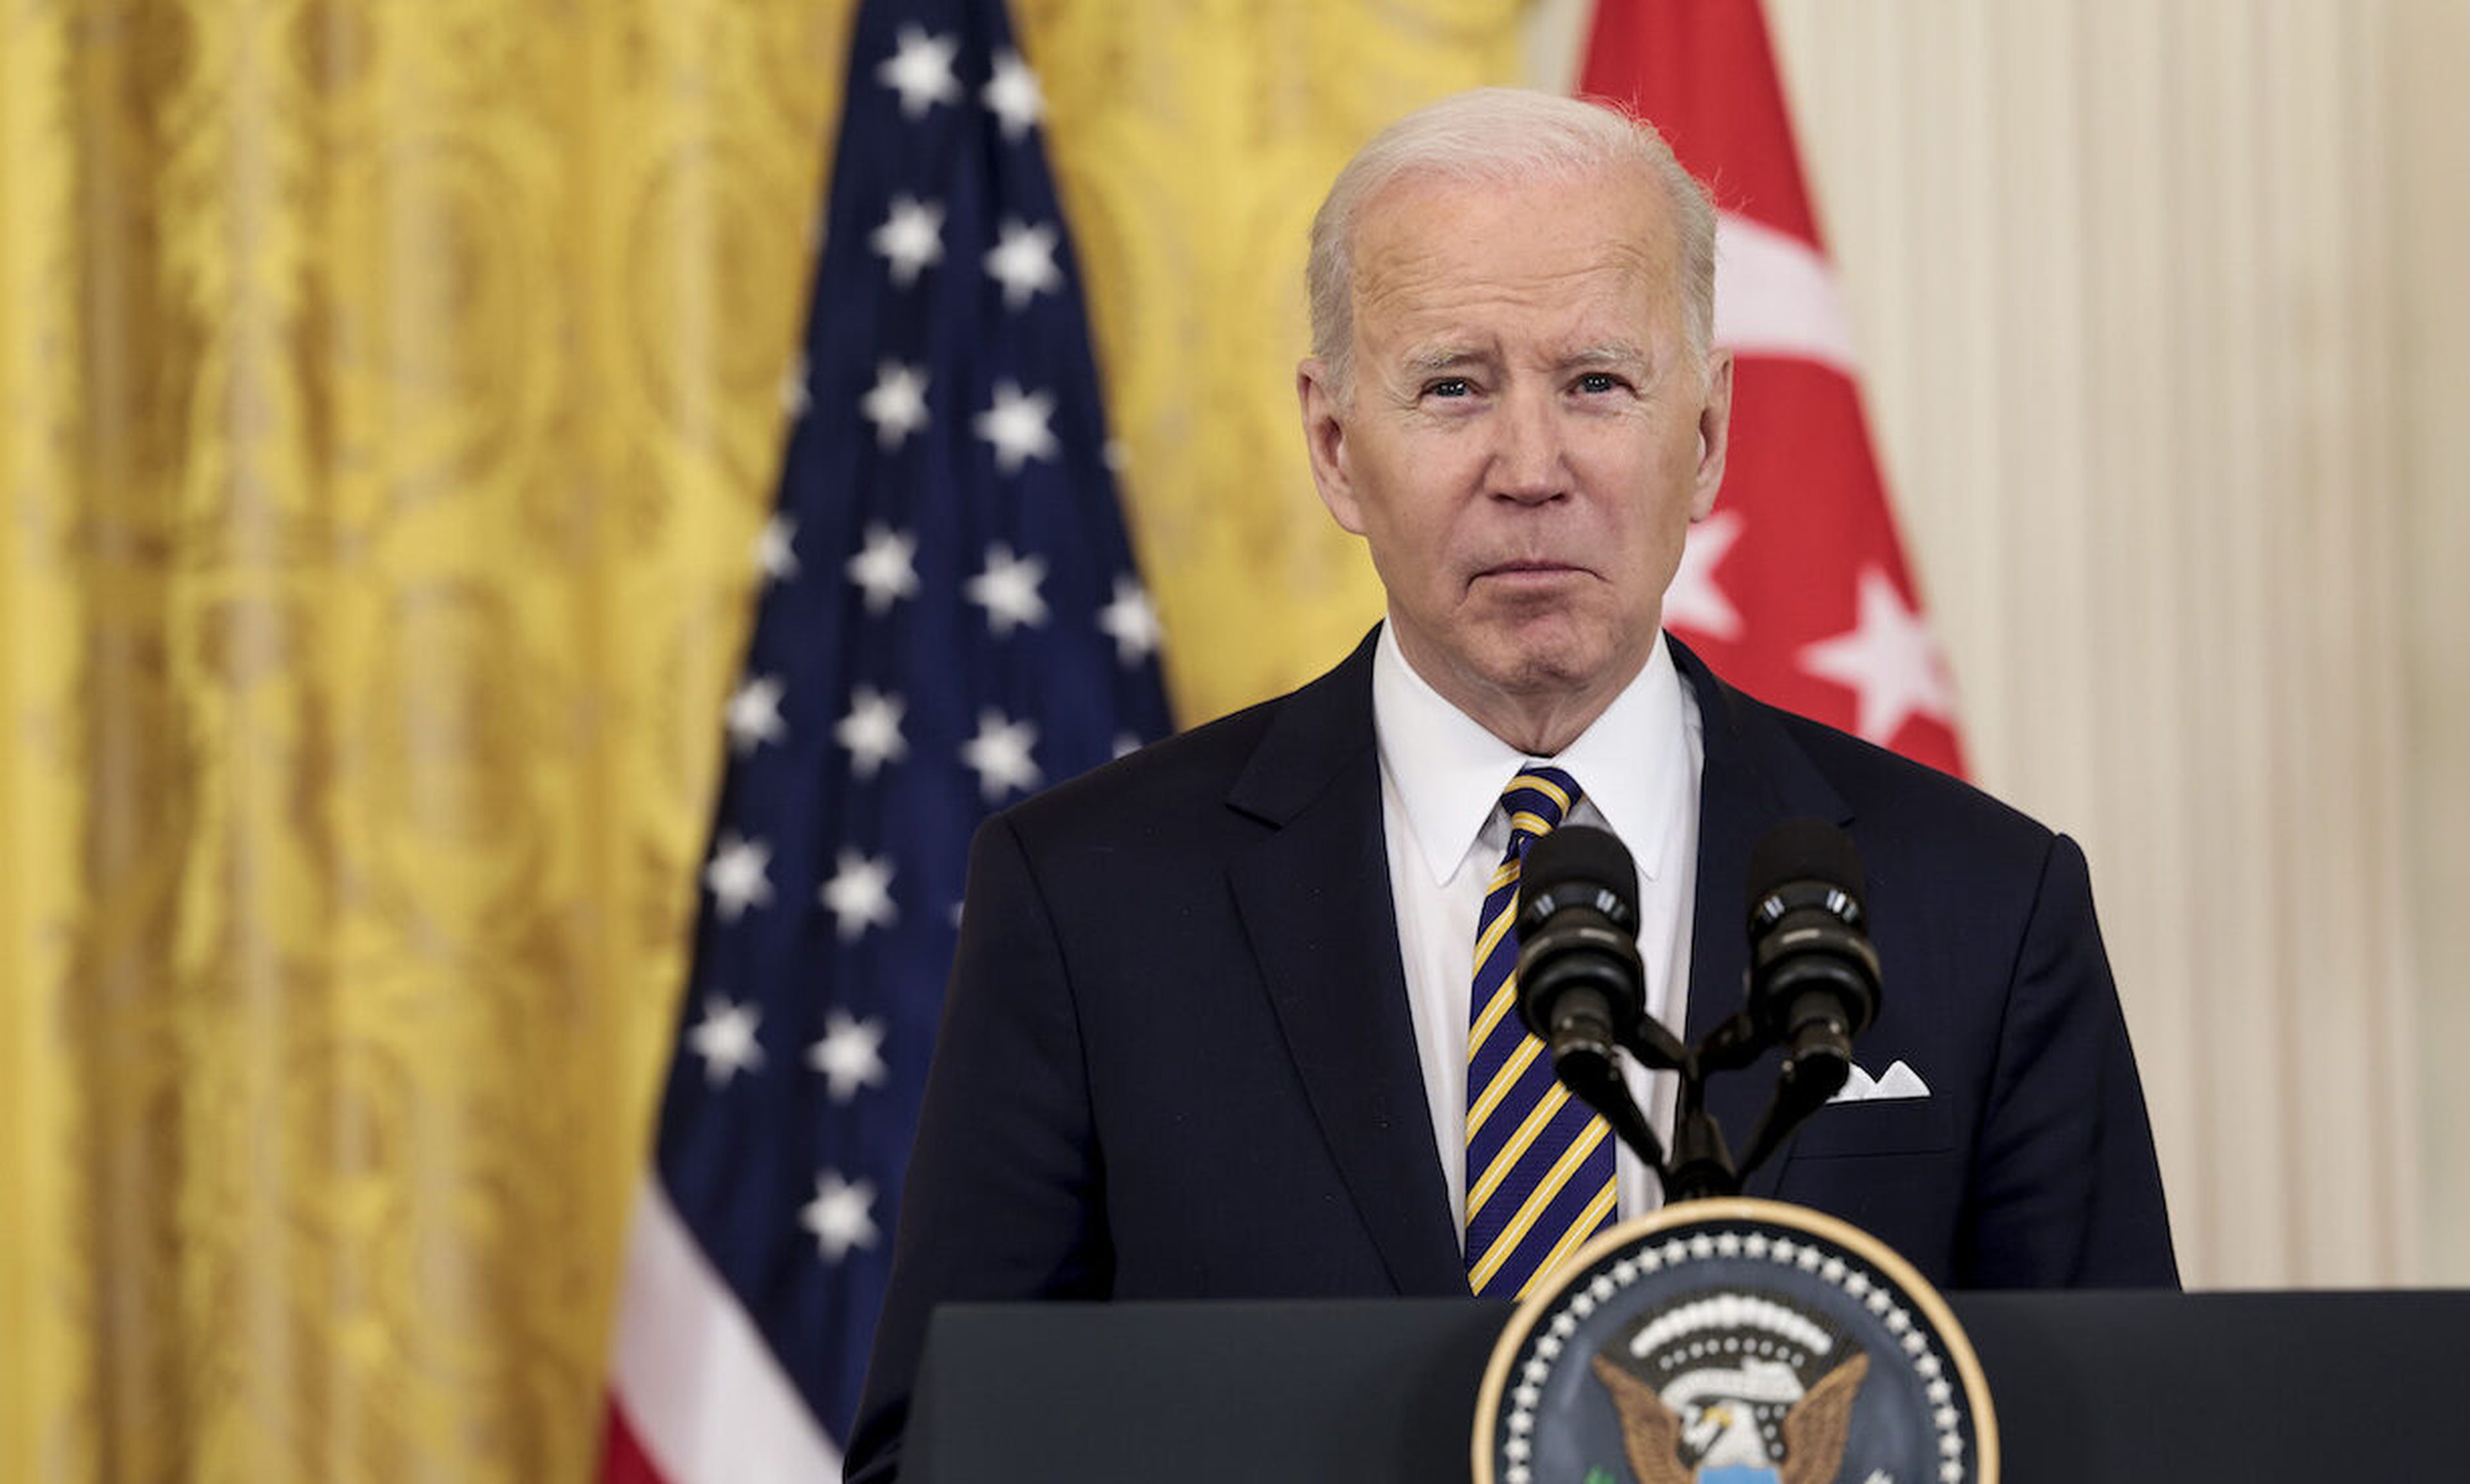 Today’s columnist, Sam Curry of Cybereason, believes that the new cyber incident reporting law signed earlier this month by President Biden was an important step in ensuring the continuity of the nation’s critical infrastructure. (Photo by Anna Moneymaker/Getty Images)